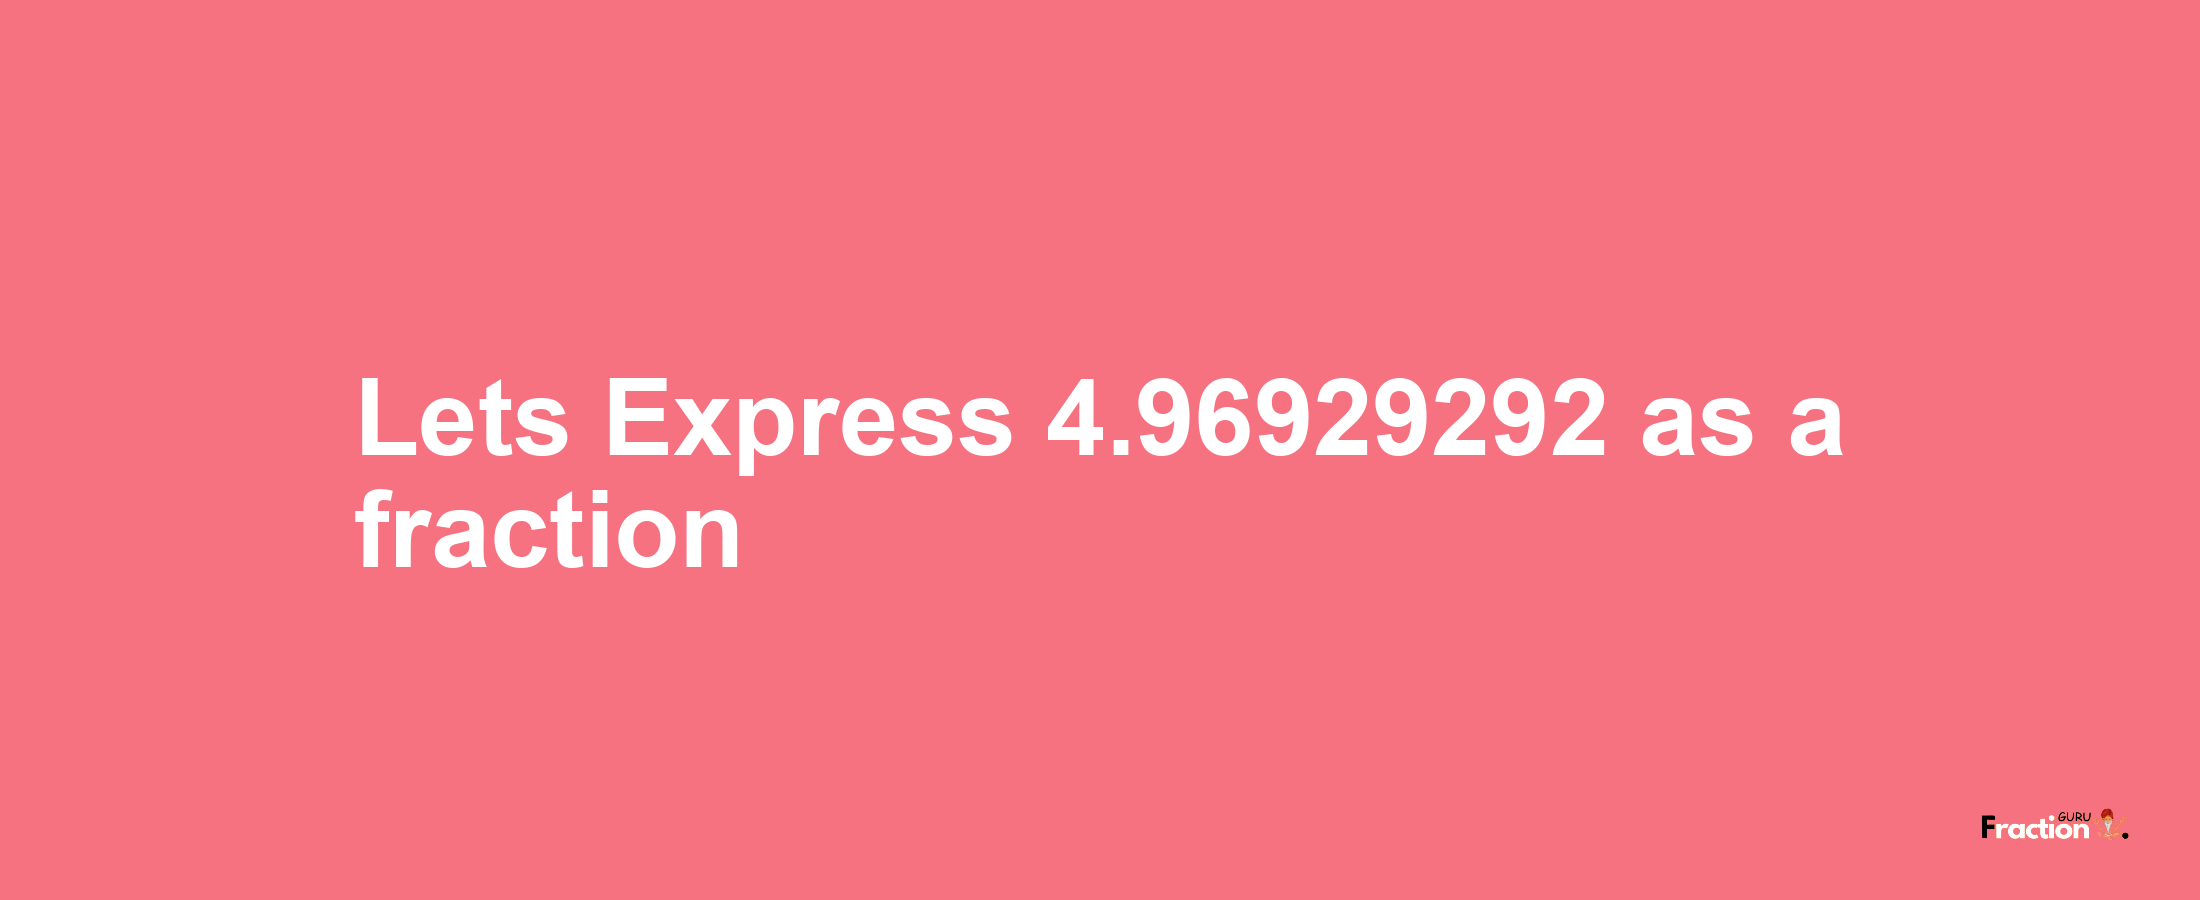 Lets Express 4.96929292 as afraction